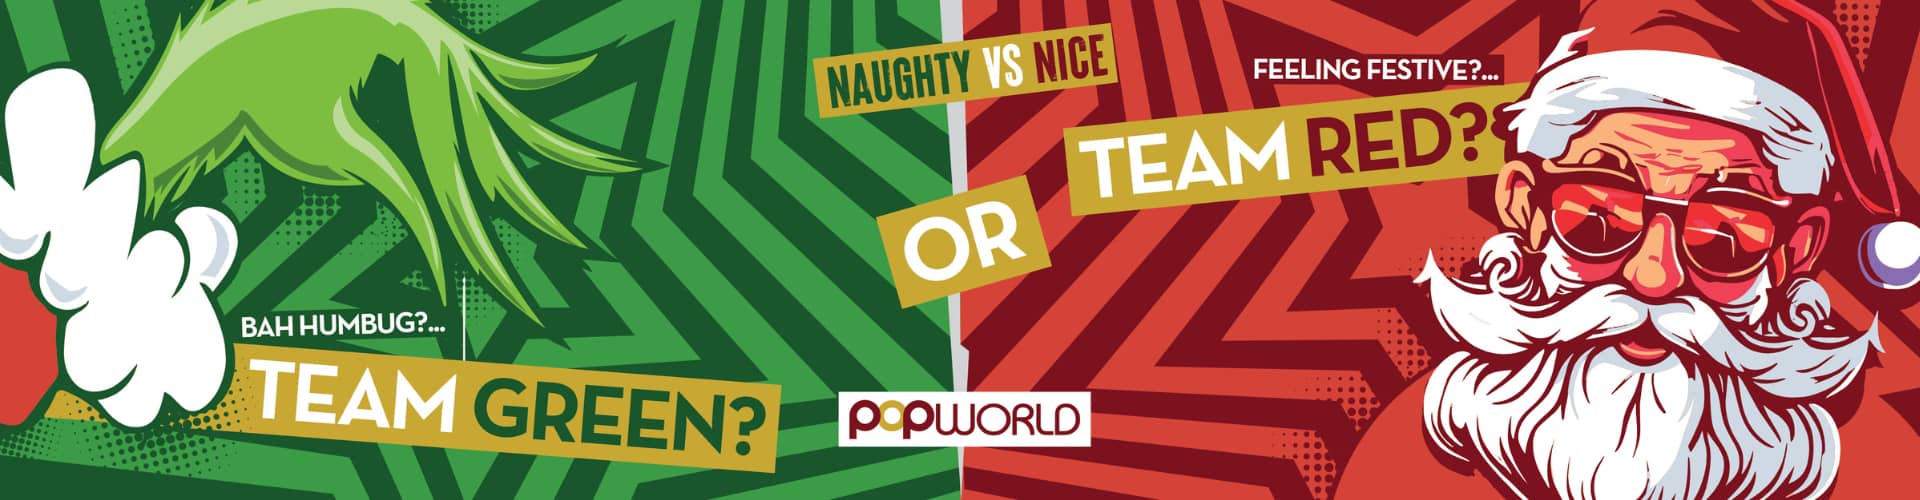 Popworld Glasgow - Naughty vs Nice - Are you Team Green or Team Red?